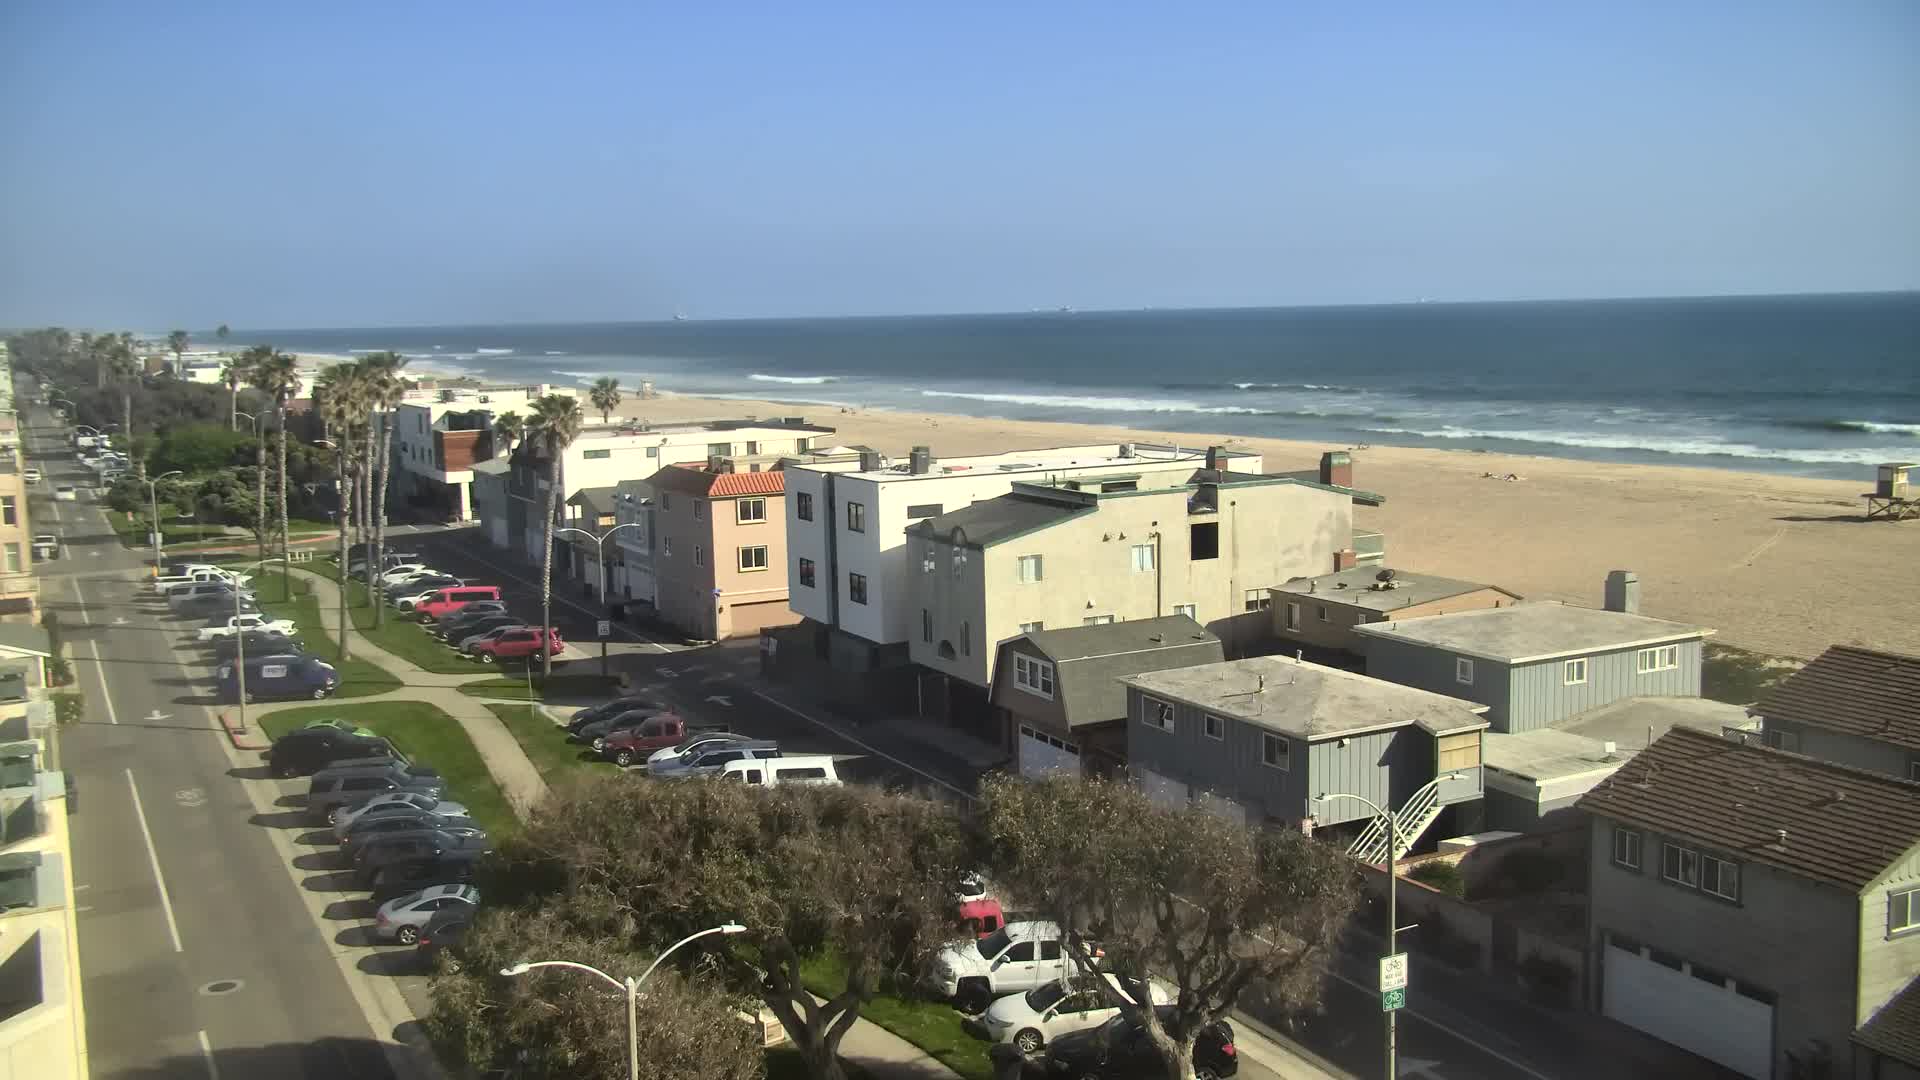 Live View of Sunset Beach as seen from The Water Tower House